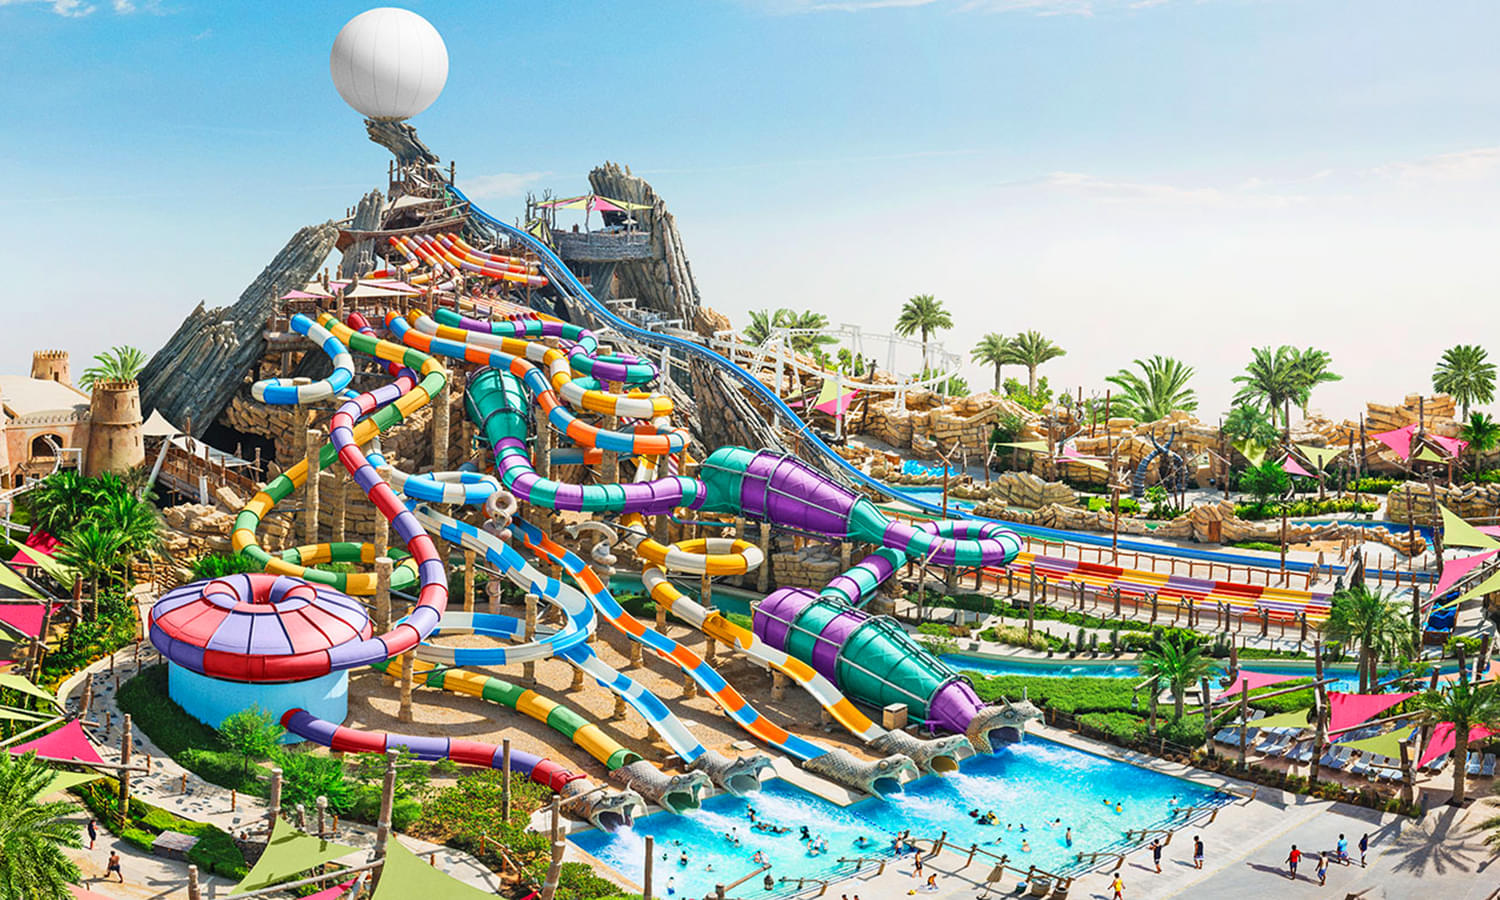 Welcome to UAE's first mega waterpark: Yas Waterworld